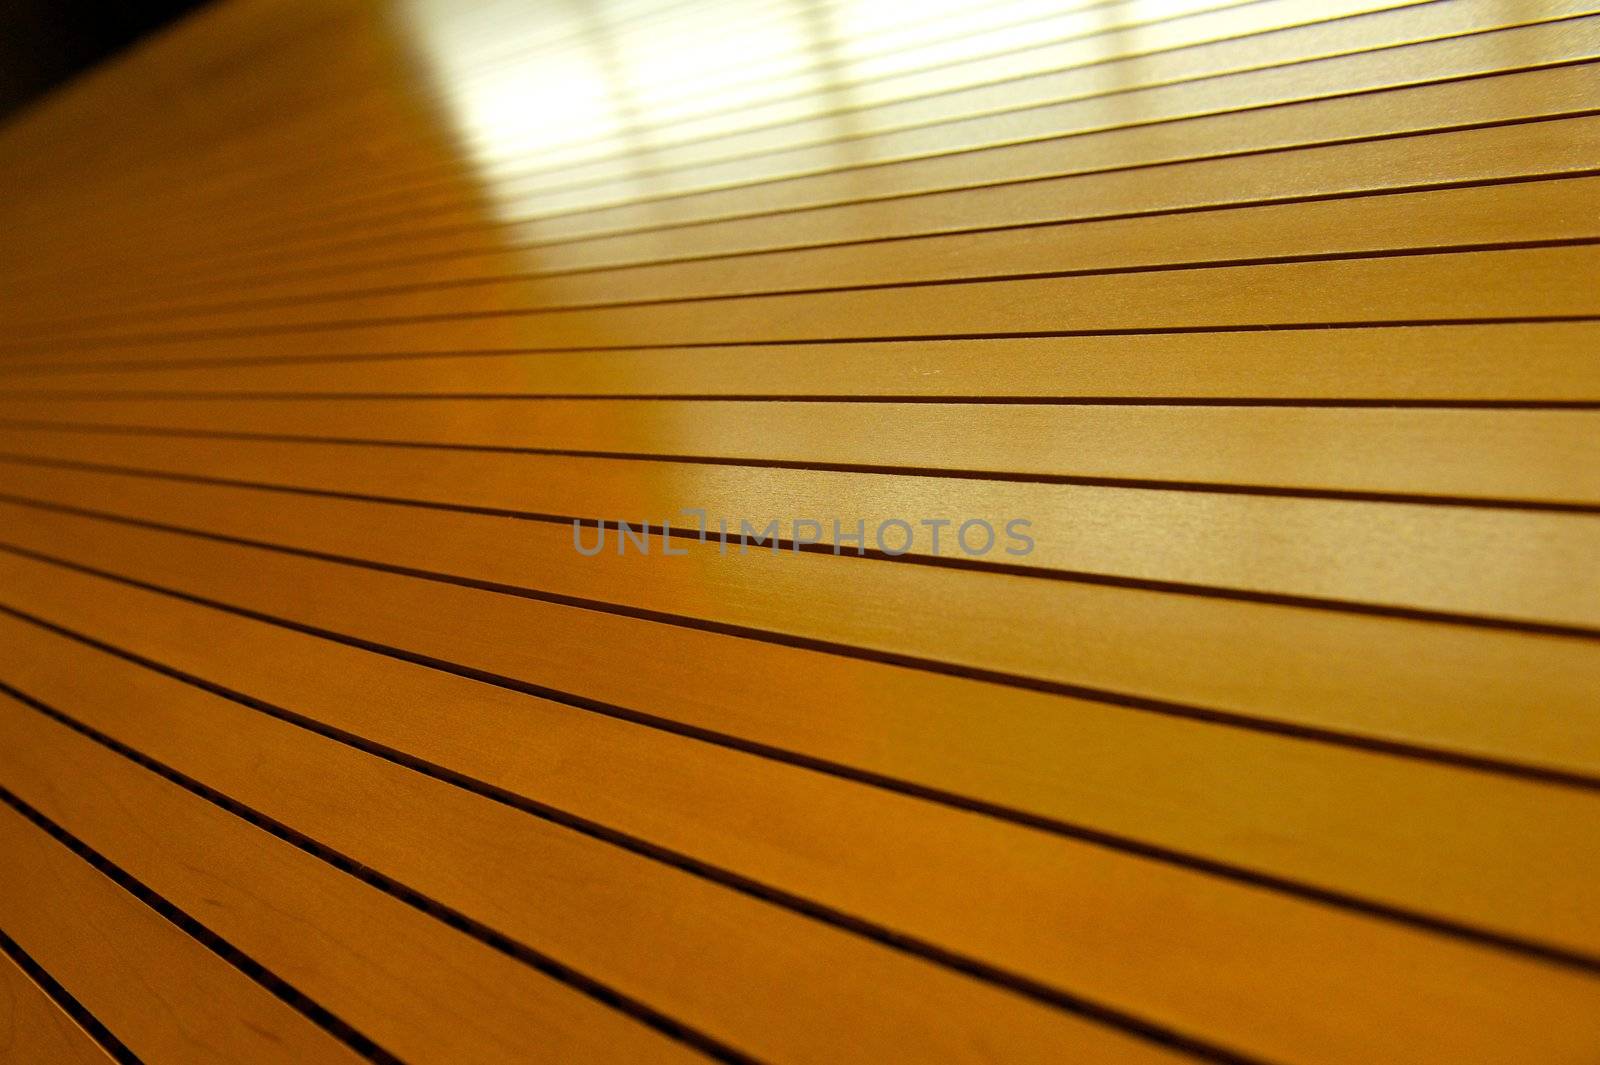 Rows of tightly fitted wooden slats form disappear into infinity with reflections of light